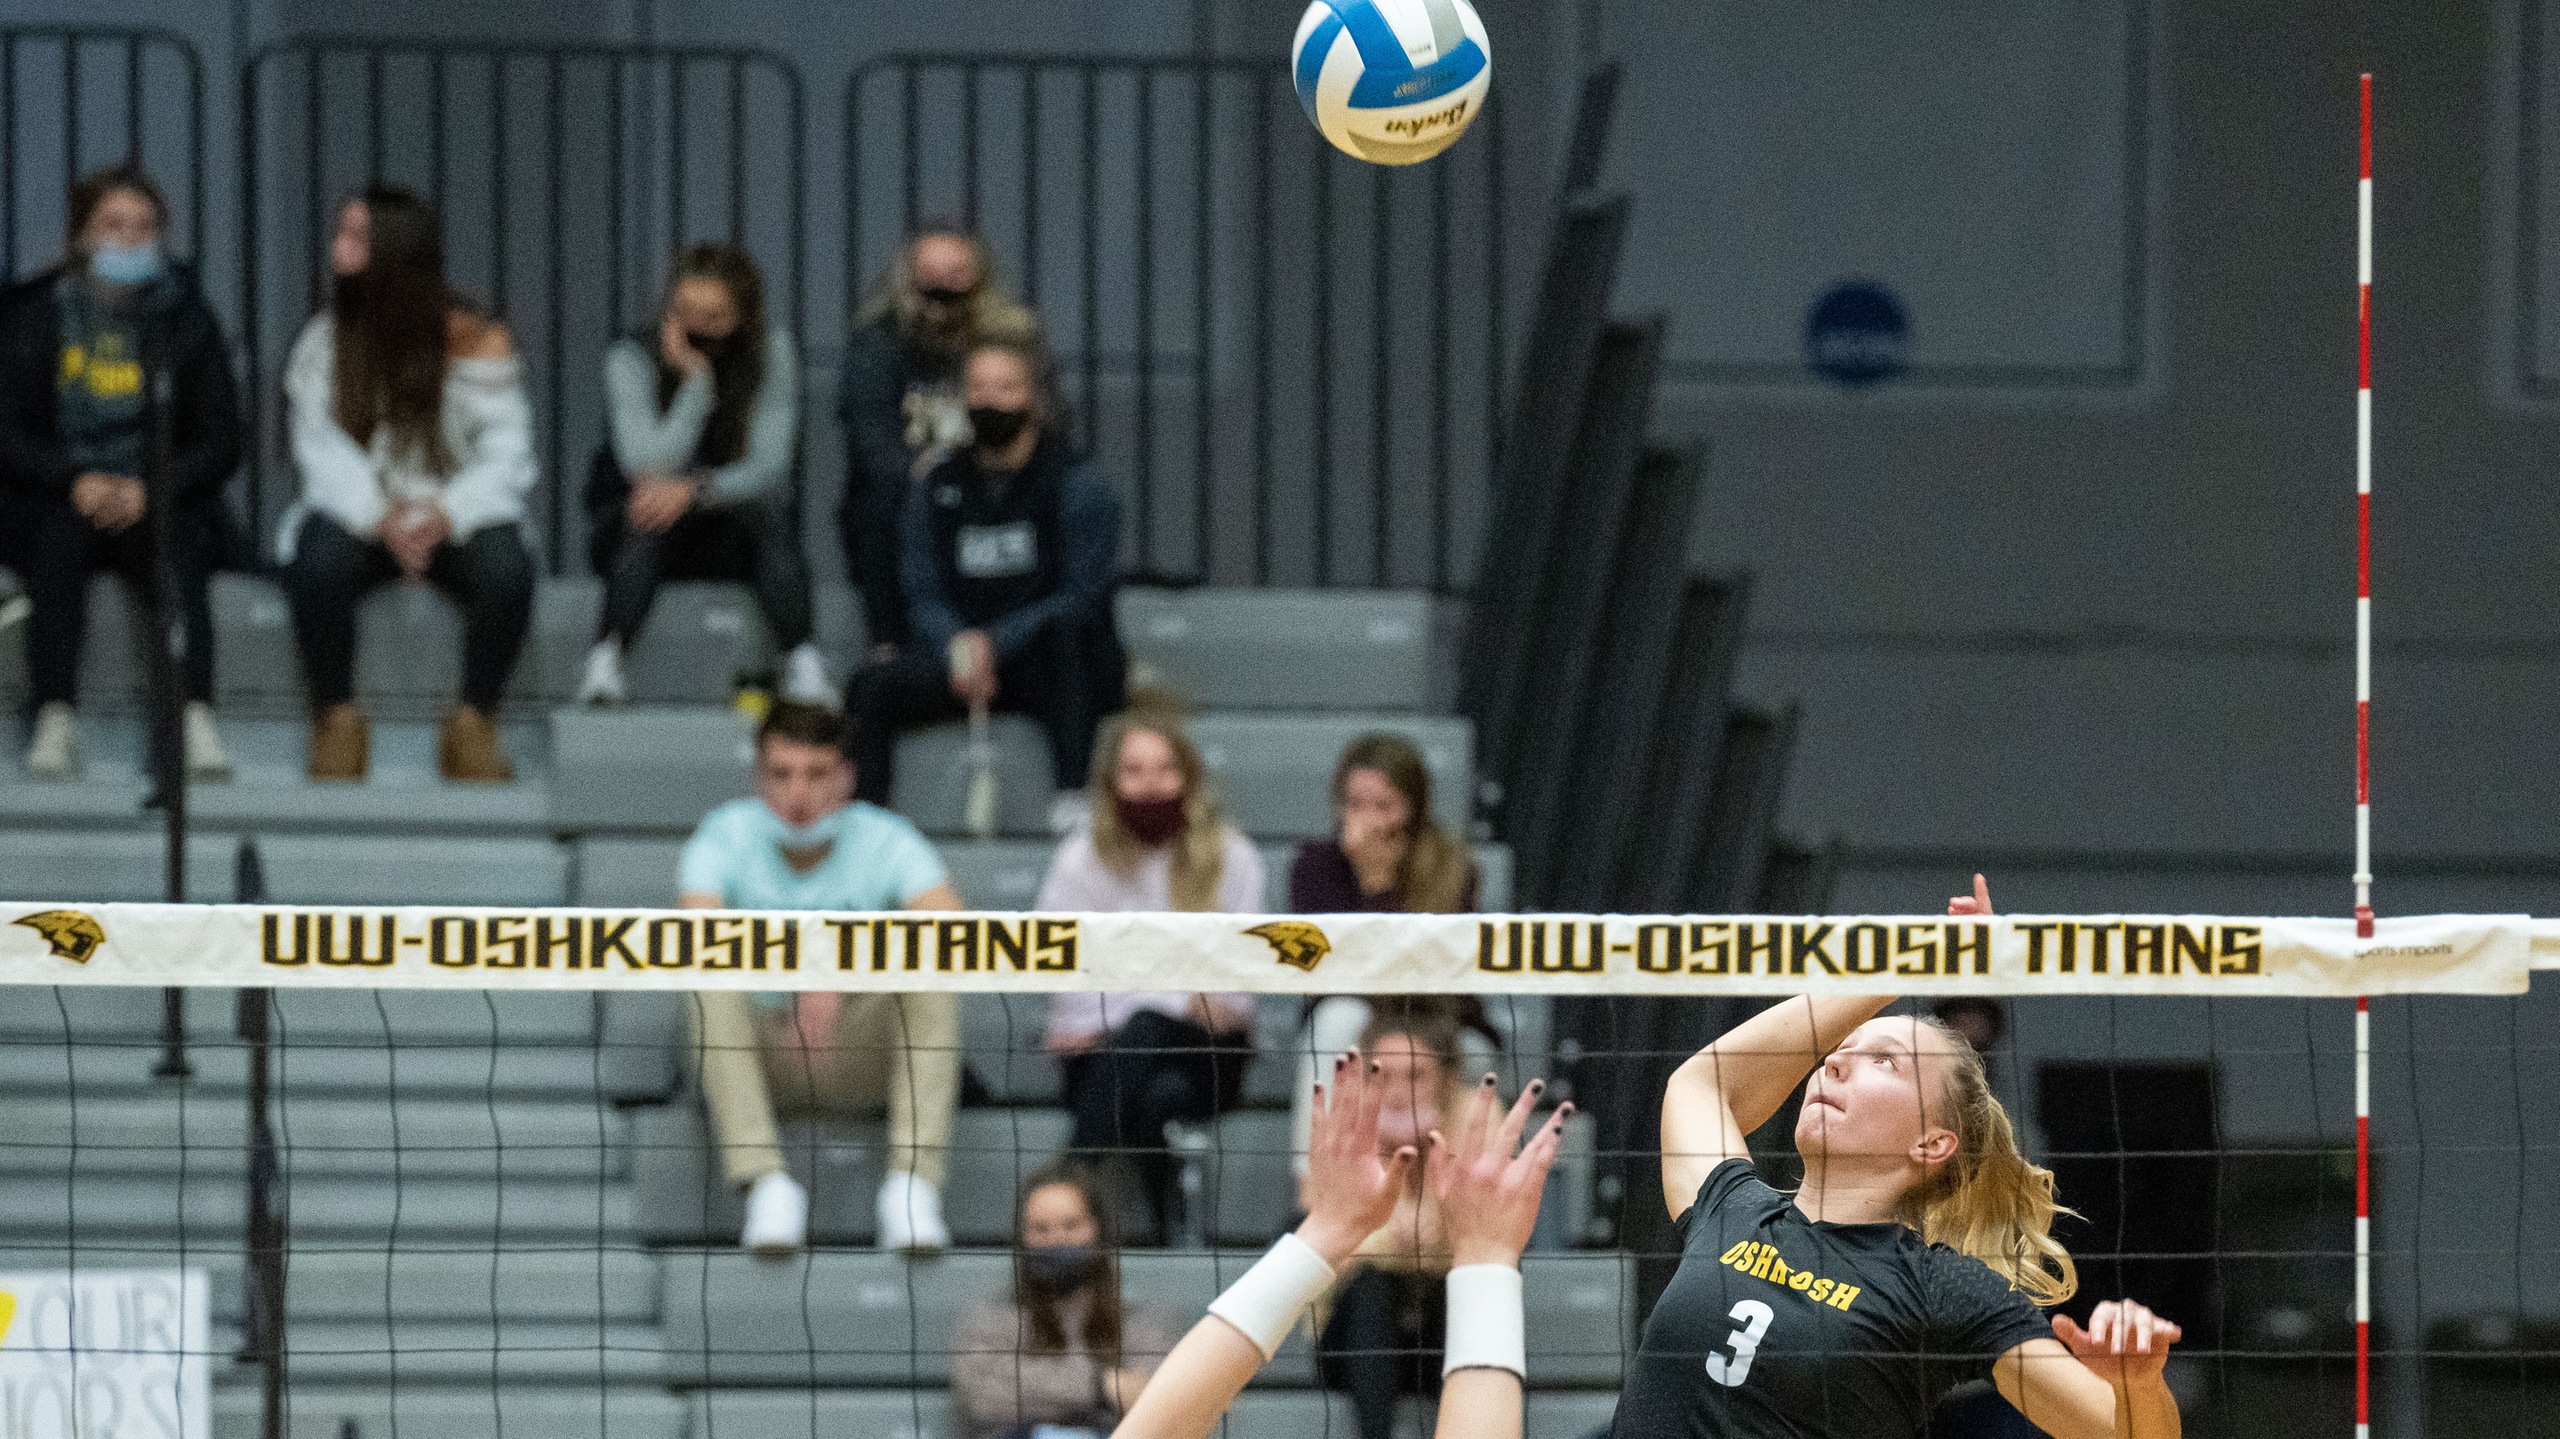 Carissa Sundholm tallied 17 kills and 14 digs against the Falcons for her fifth double-double of the season.